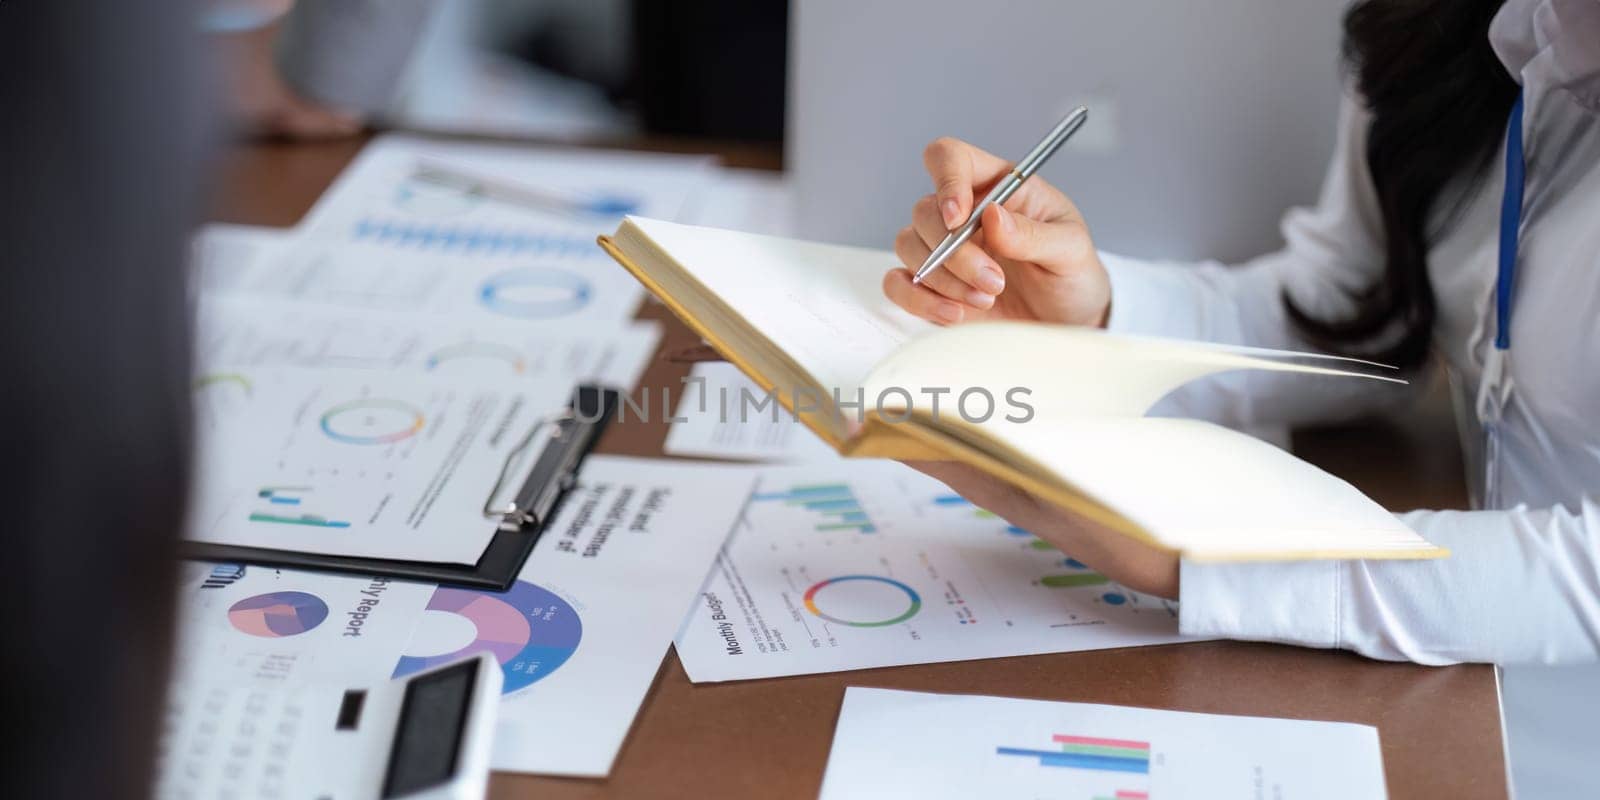 Close up business team analyzes financial business finance reports on laptop and graph documents during corporate meeting discussion showing successful teamwork, business meeting ideas by nateemee